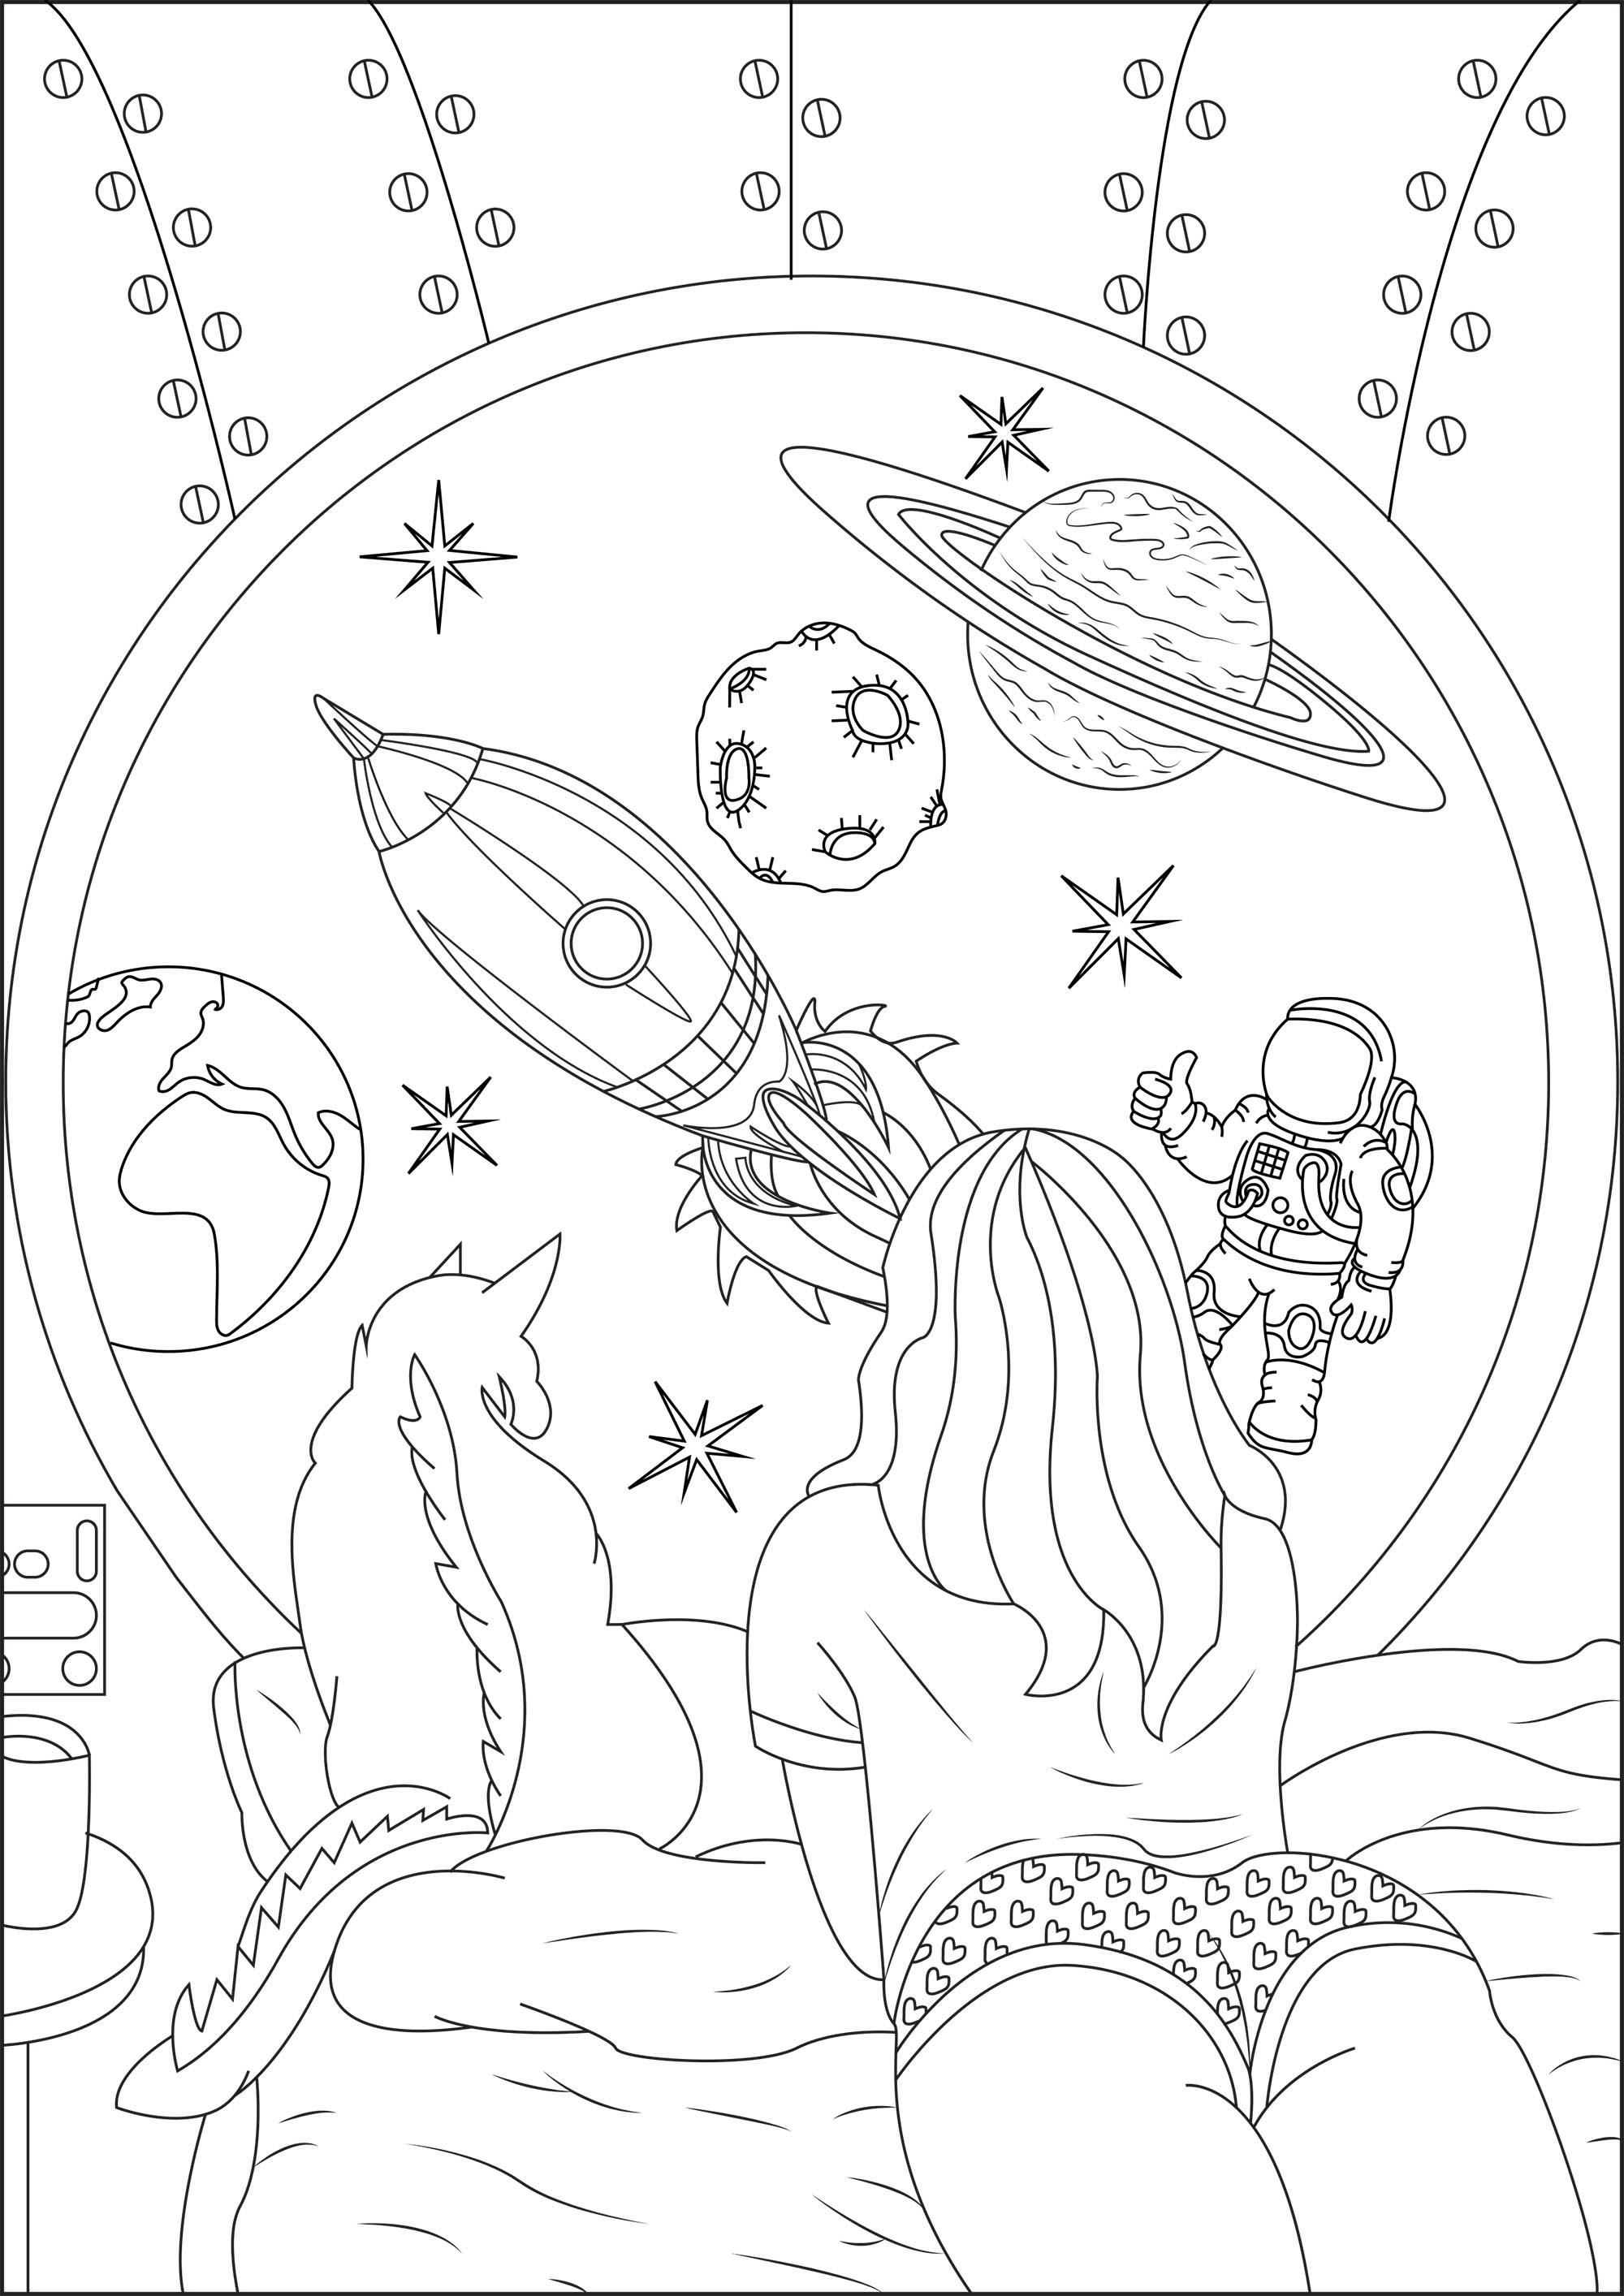 76 Coloring Pages For Adults Girl Images & Pictures In HD